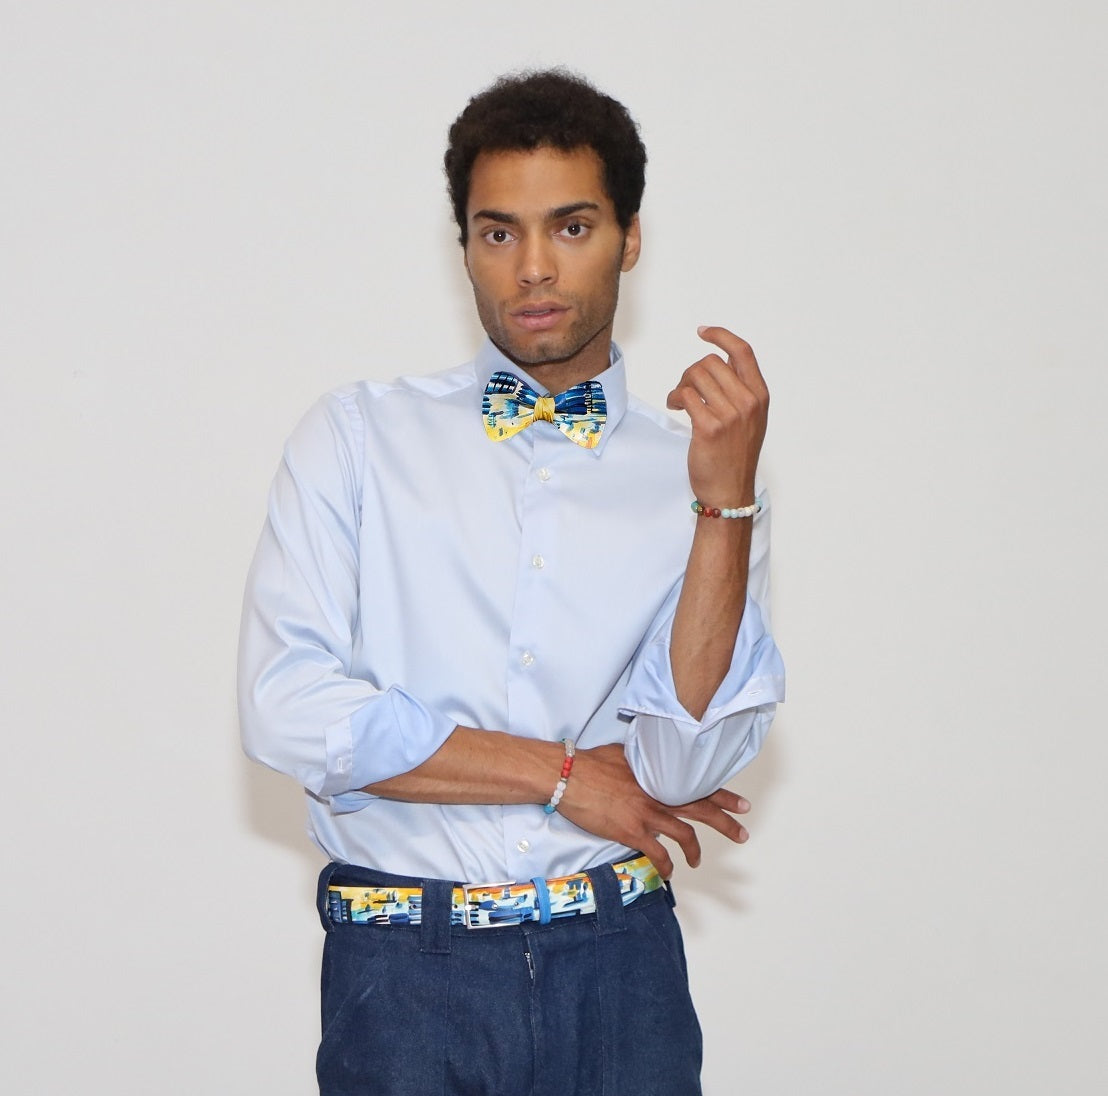 our model wearing blue jeans and a white shirt with painted bow tie and belt in a white background